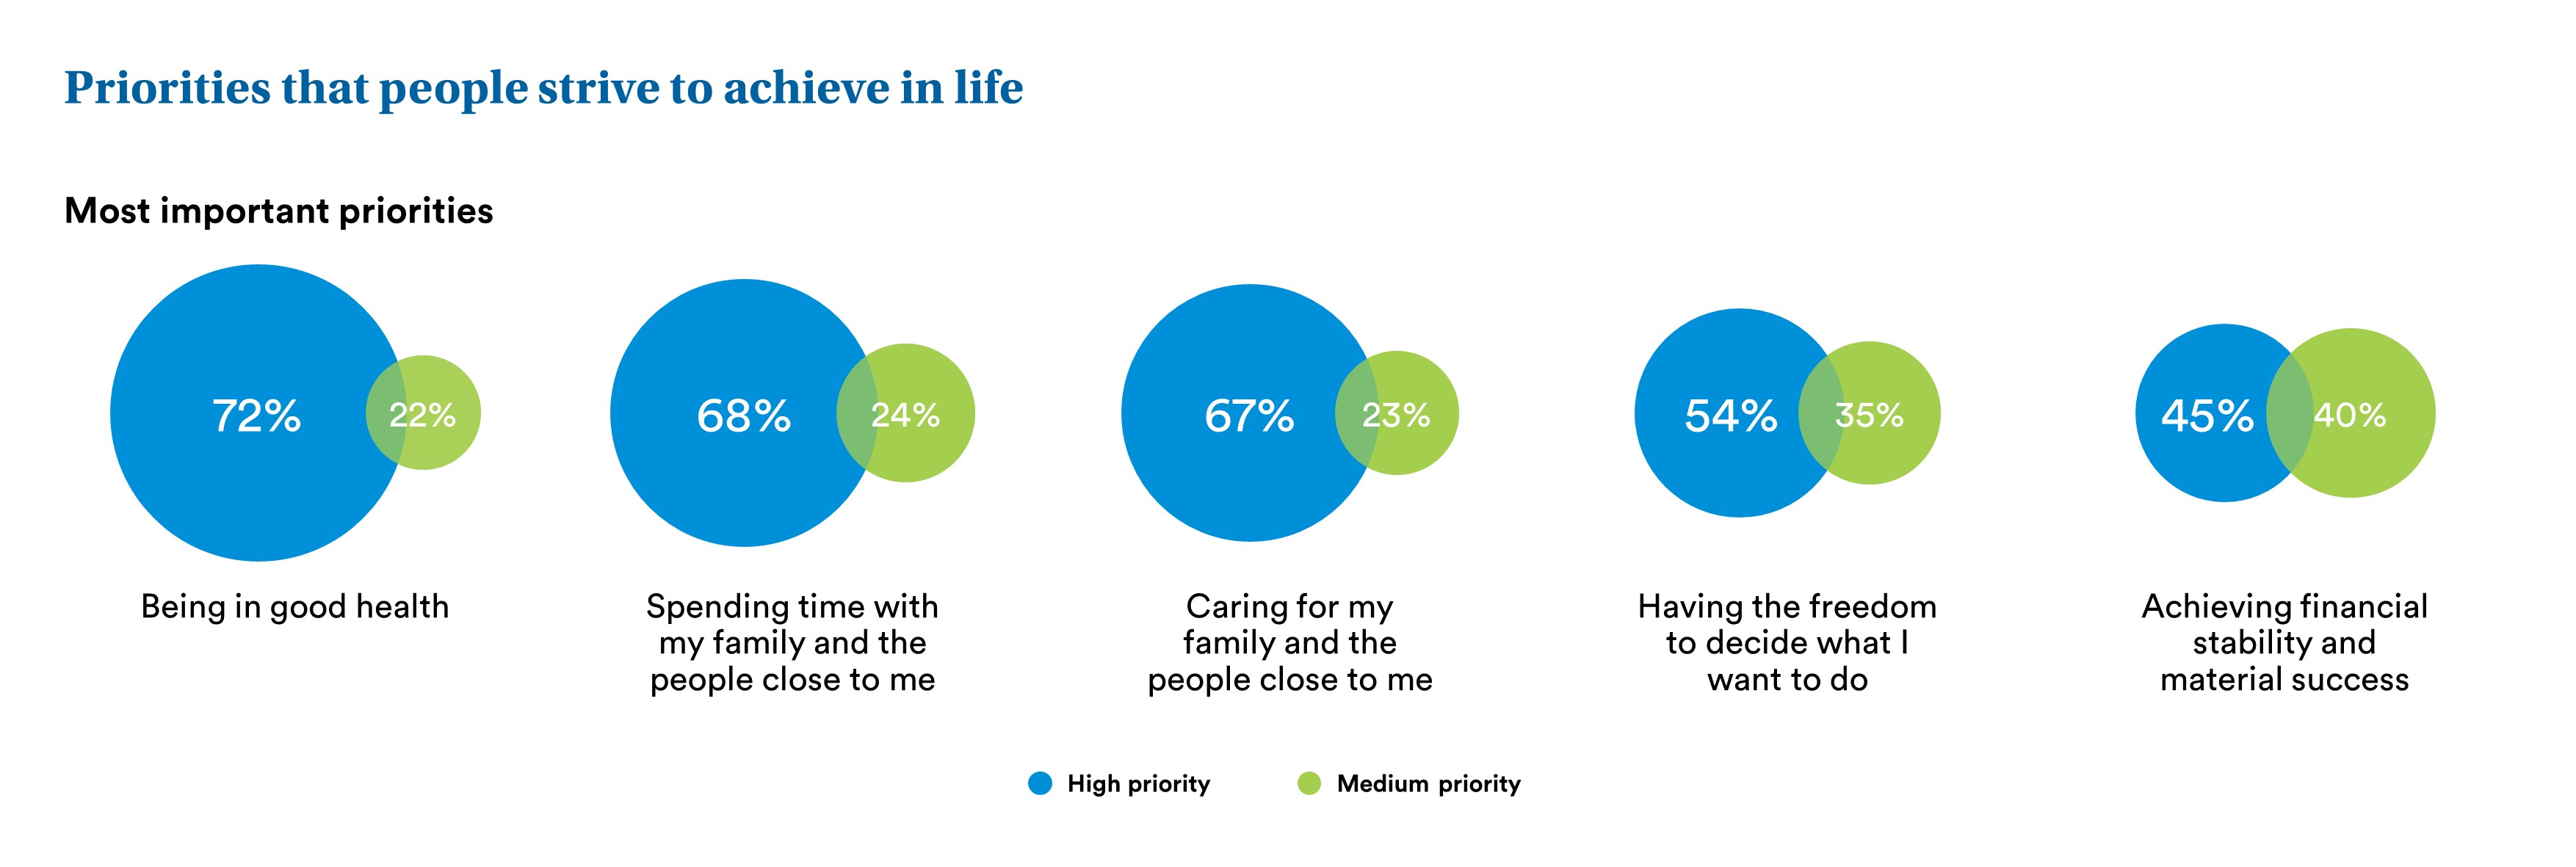 Priorities that people strive to achieve in life. Most important priorites. 72% being in good health. 68% spending time with my family and the people close to me. 675% caring for my family and the people close to me. 54% having the freedom to decide what I want to do. 45% achieving financial stability and material success. 